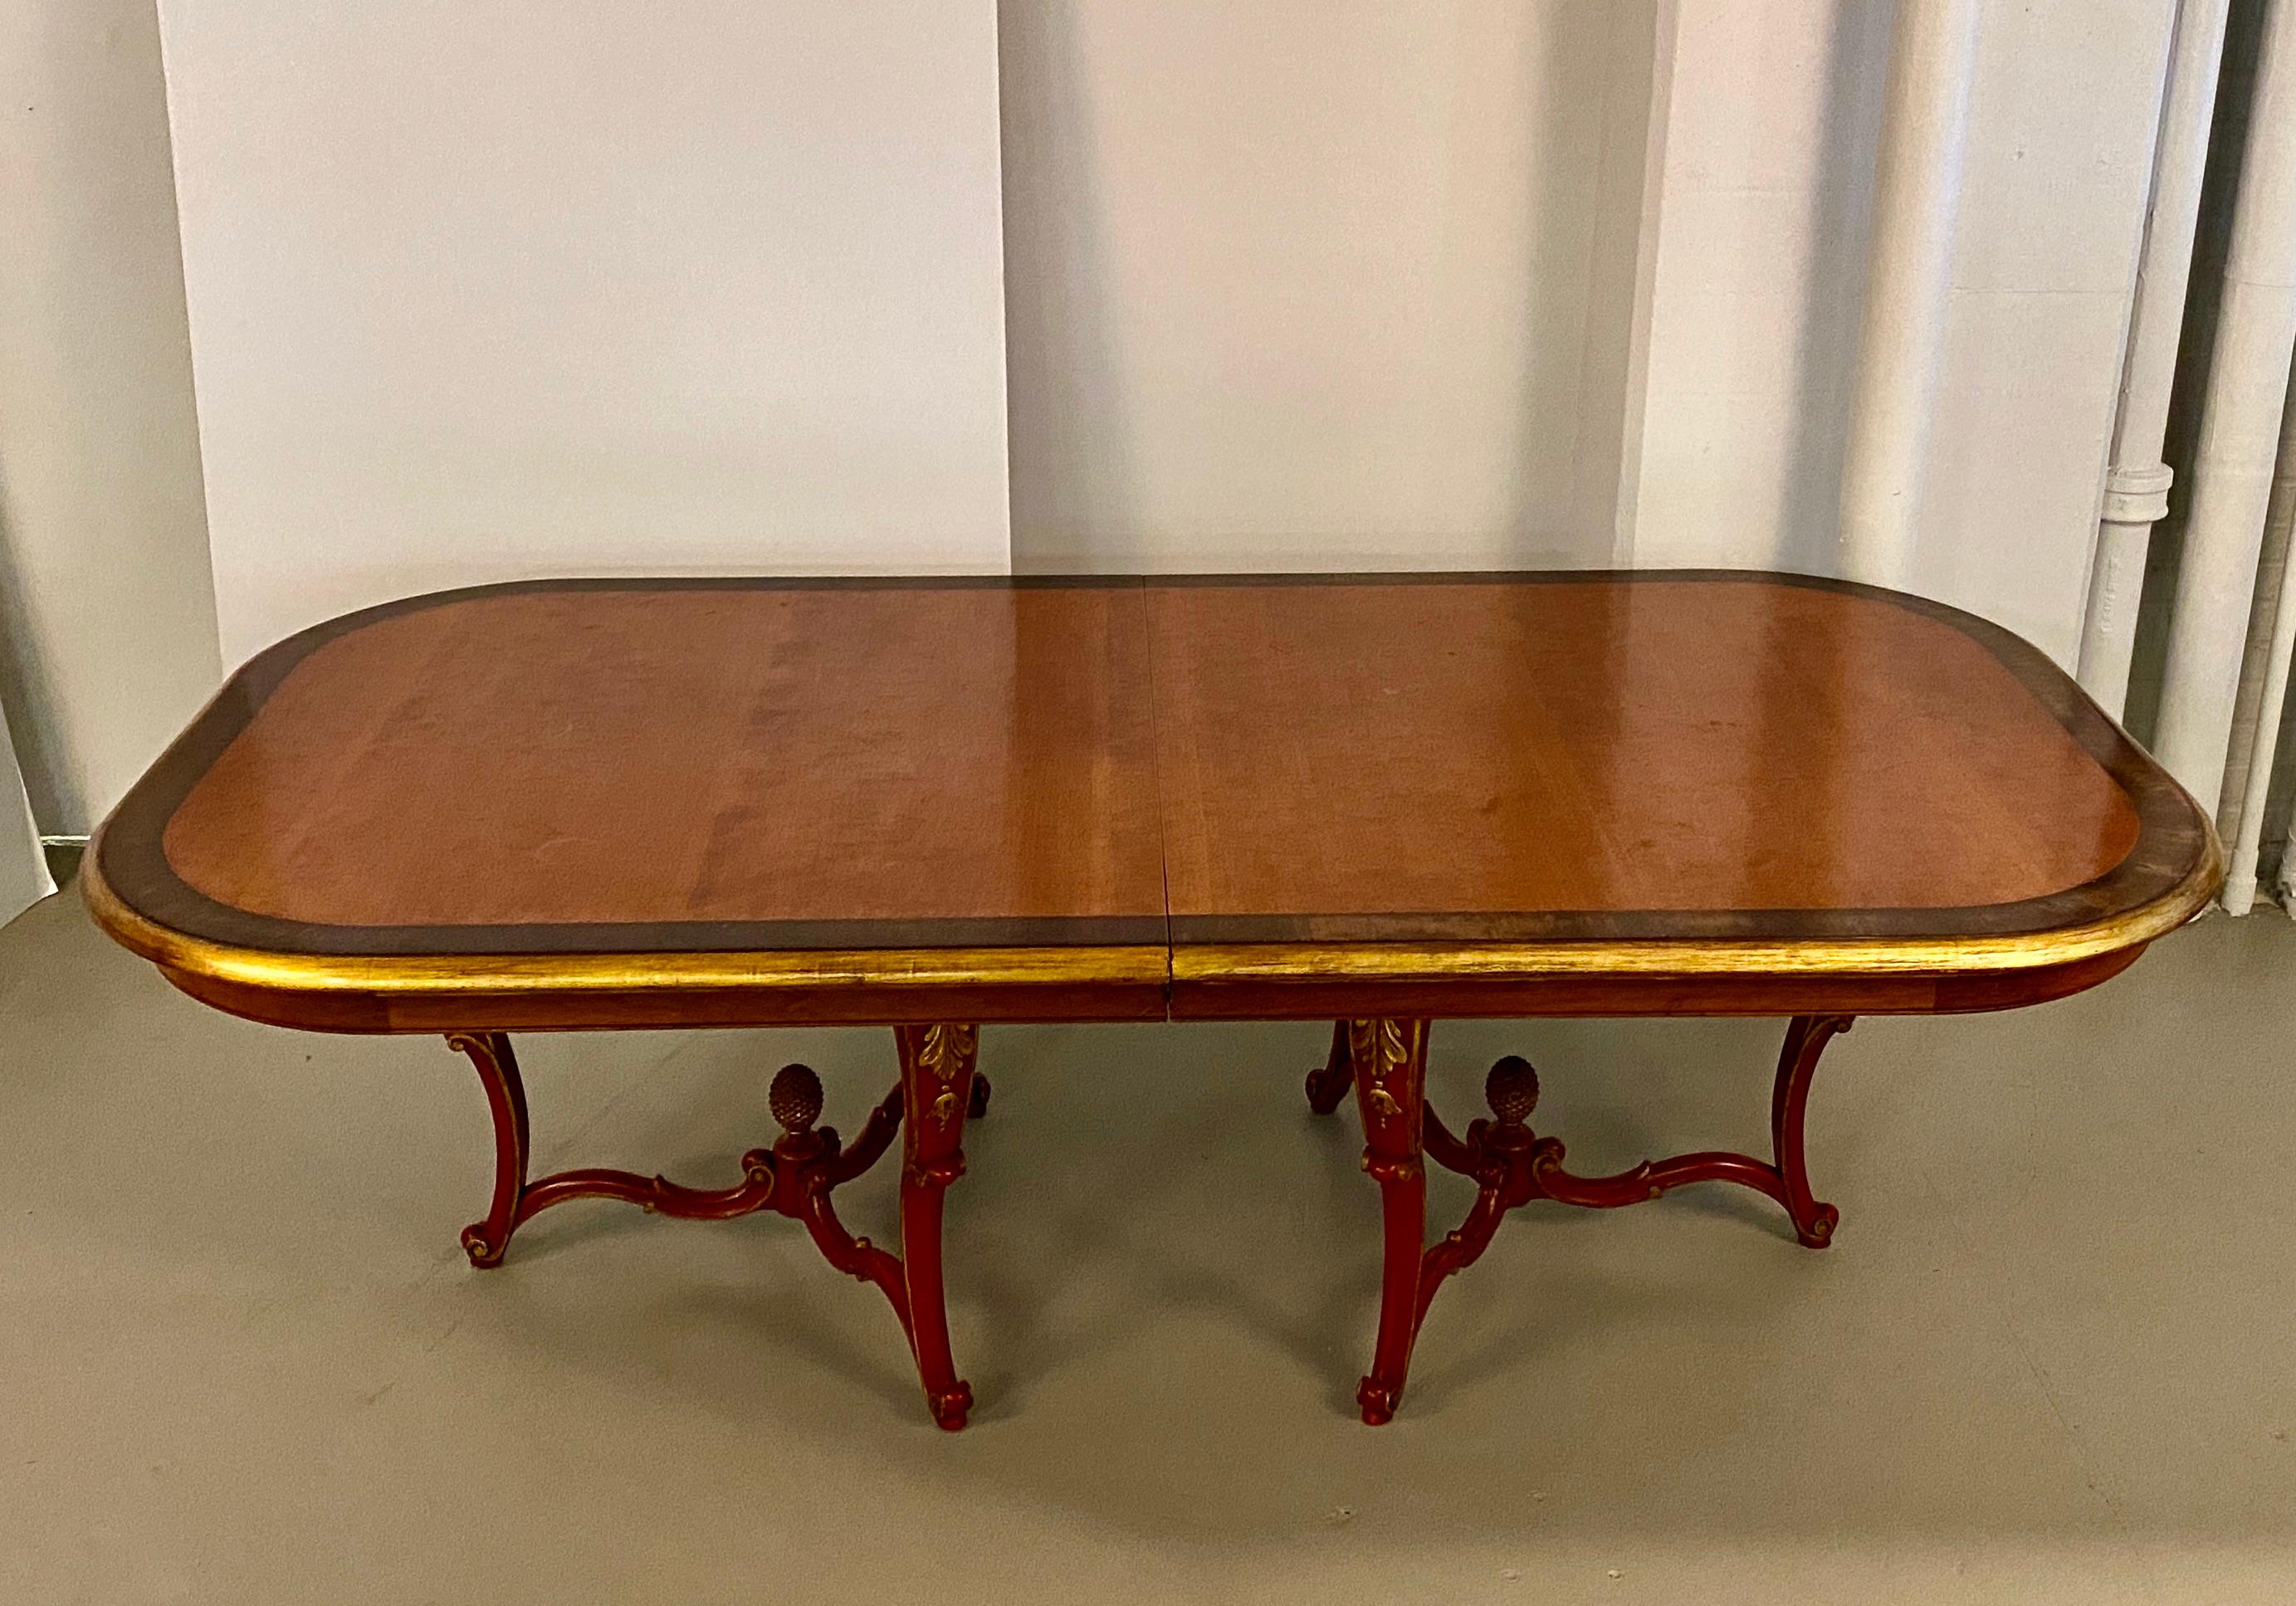 Note the lovely painted rococo base on this glamorous dining table. Deep cabriole legs in red and gold support a mahogany table top with lighter center and darker stained border. Fully extended with the leaf in place the table measures 9' 8